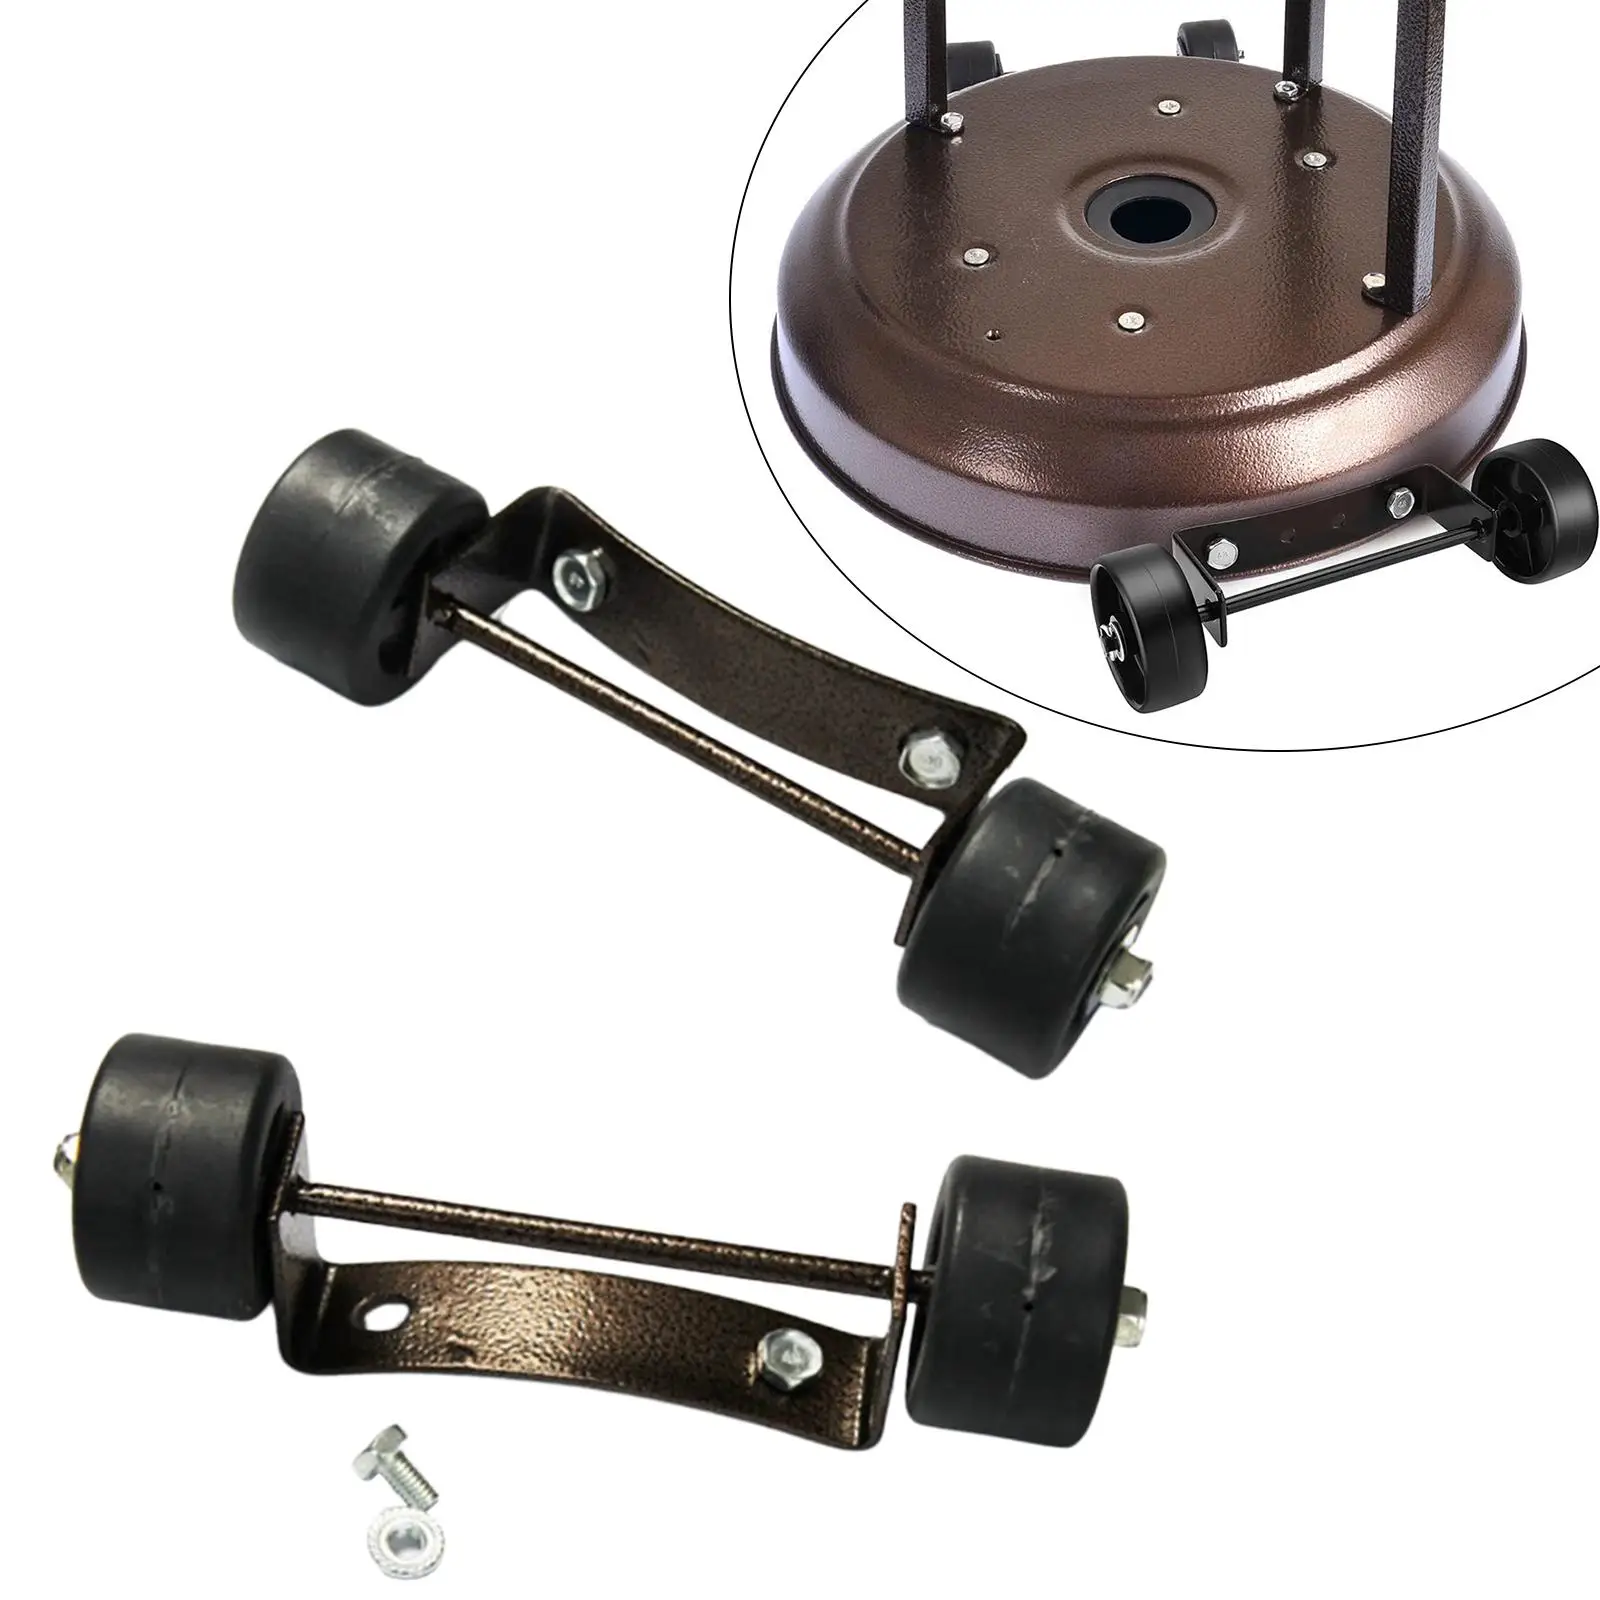 Universal Movable Wheel, Universal Patio Heater Wheel Kit, Metal, High Performance, Gas Patio Heater Replaces for Heater